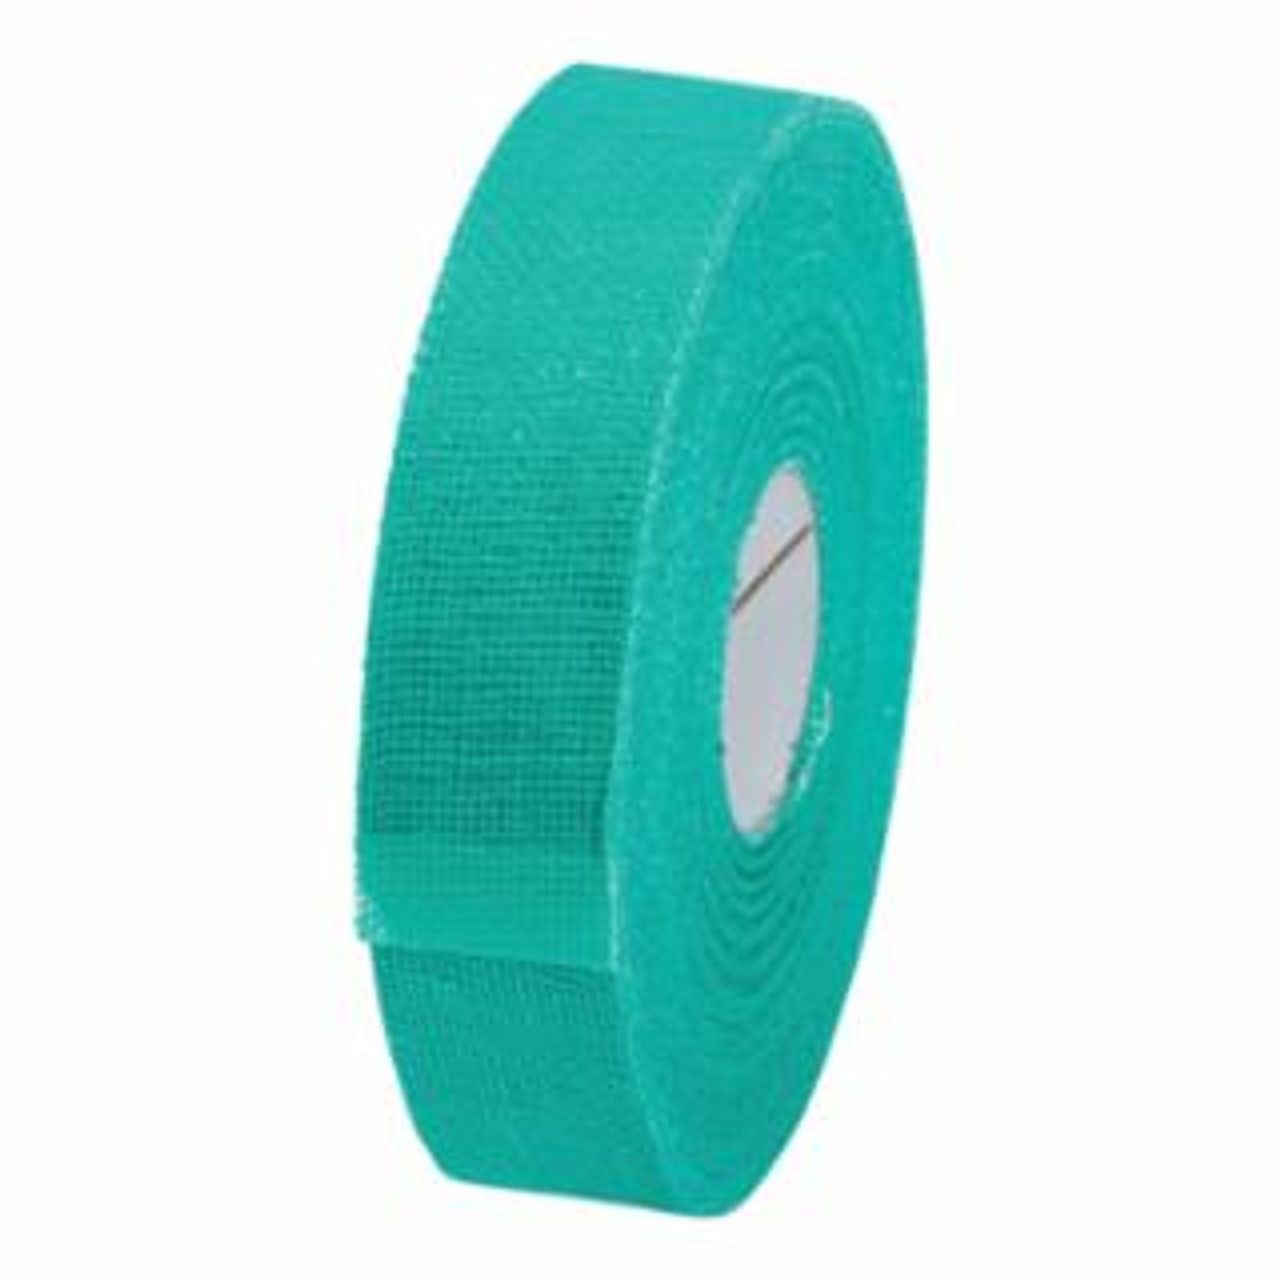 Elastic Tape 1534, 1 inch wide, 5 yards per roll, sold by the roll